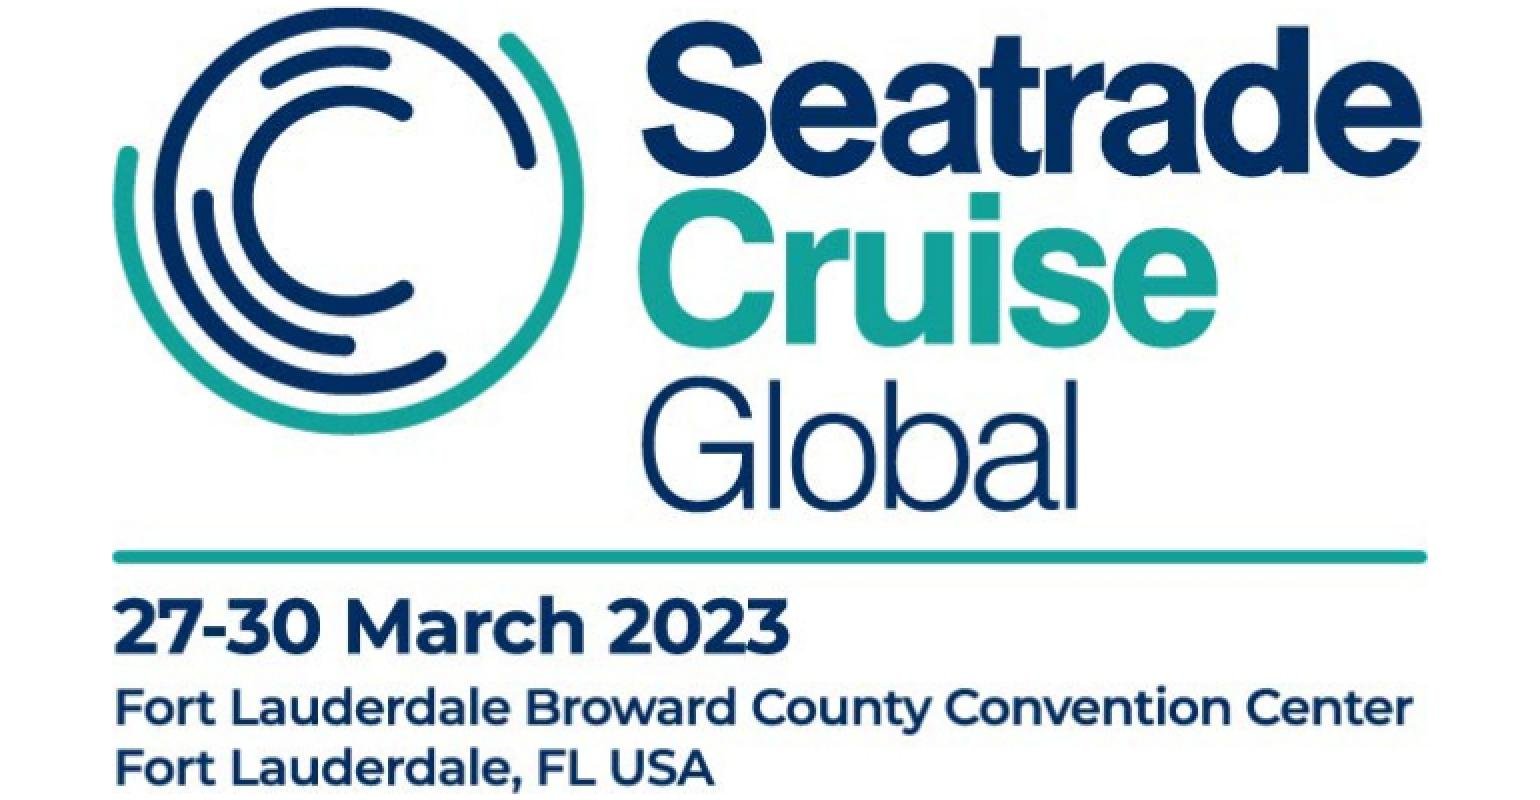 Seatrade Cruise Global is coming to Fort Lauderdale in 2023 Seatrade